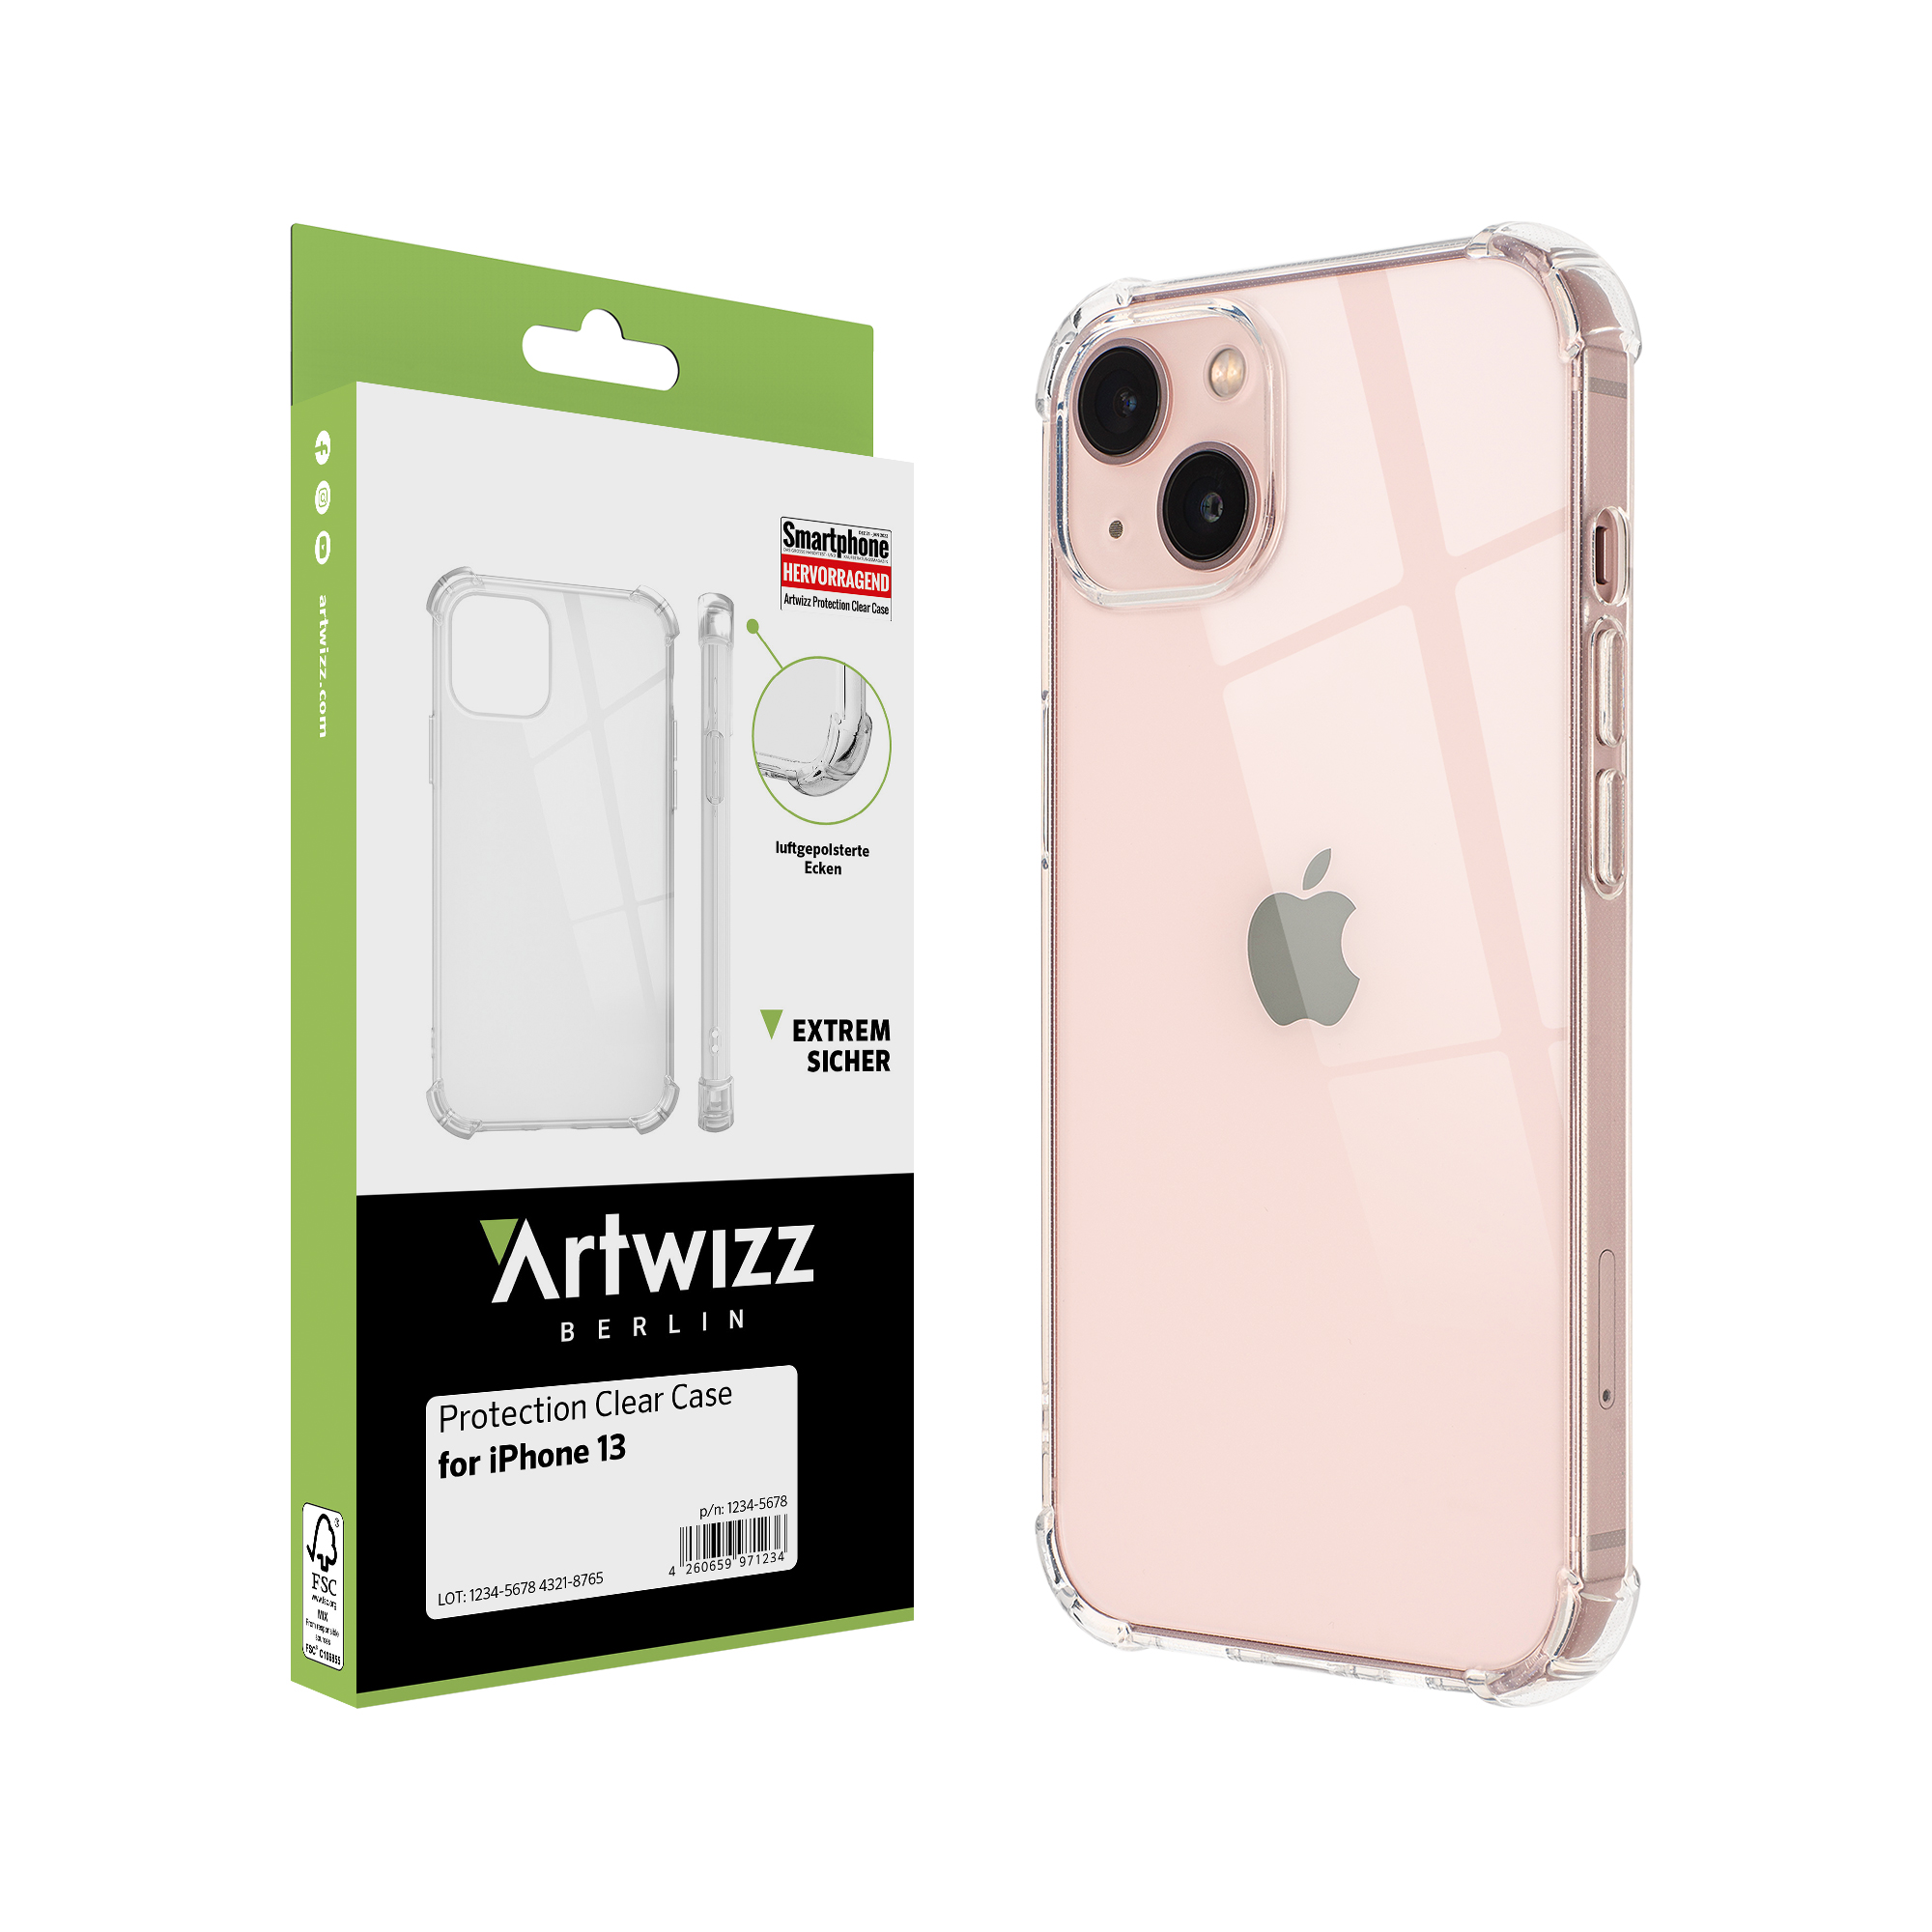 ARTWIZZ Protection Clear Case, iPhone 13, Backcover, Transparent Apple